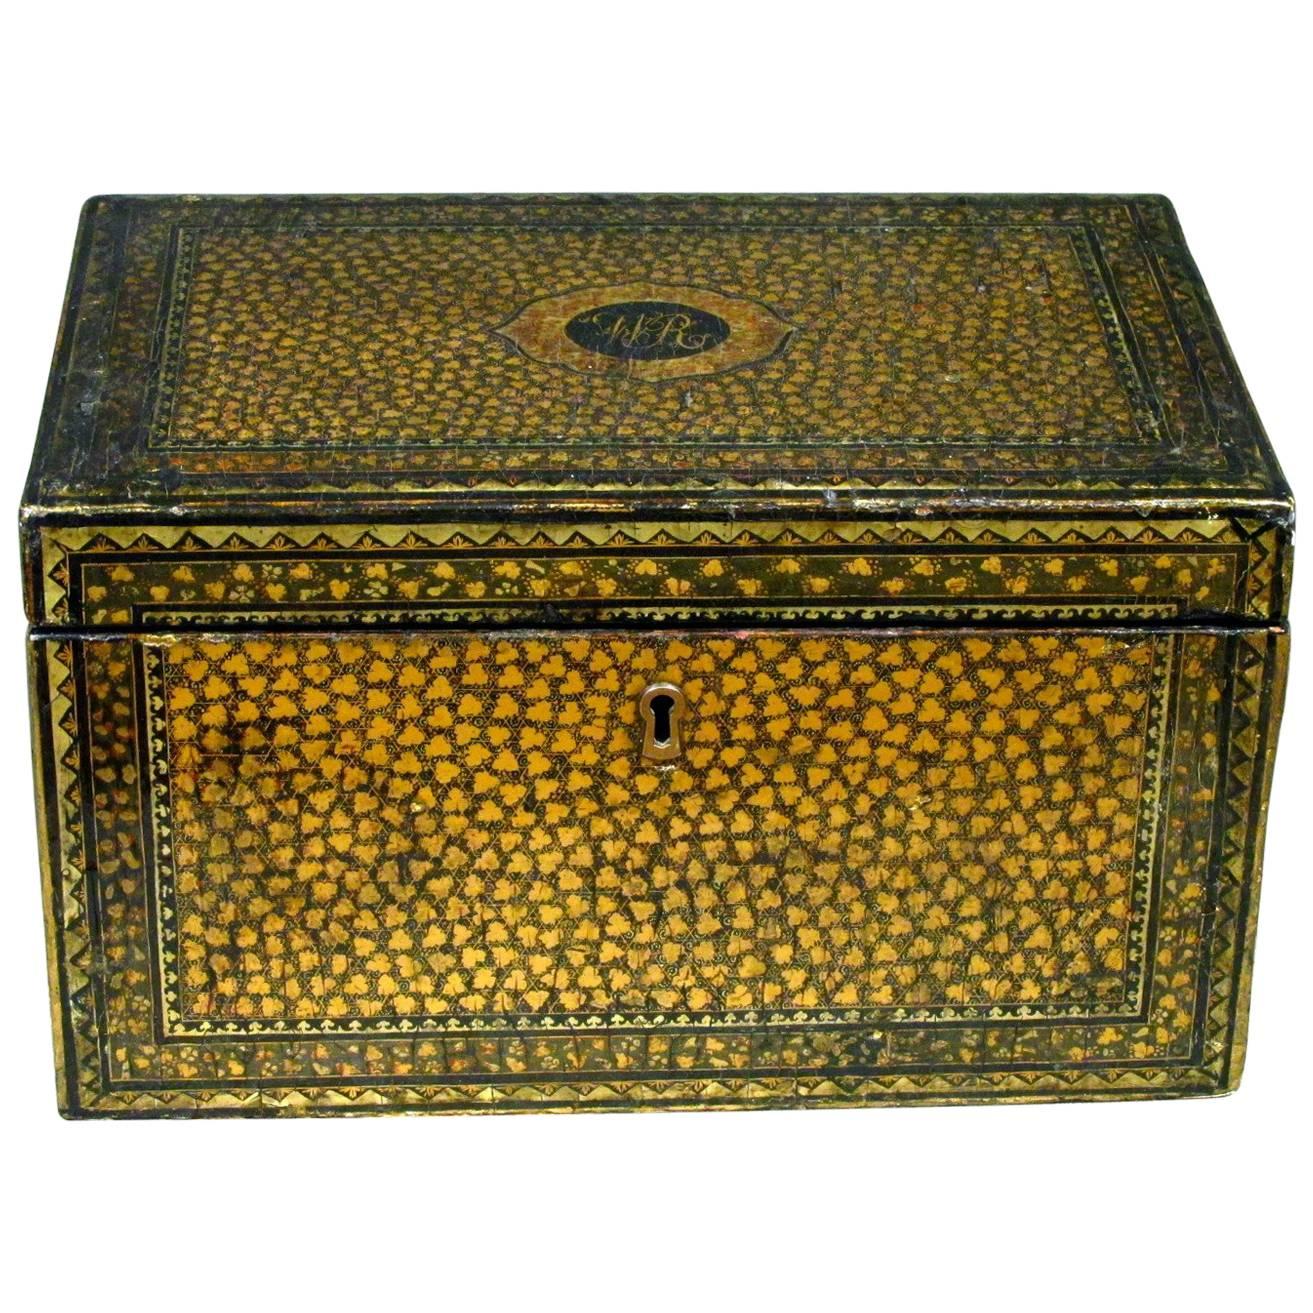 An Exceptional 19th Century Chinese Export Lacquer Tea Caddy, Guangzhou (Canton)